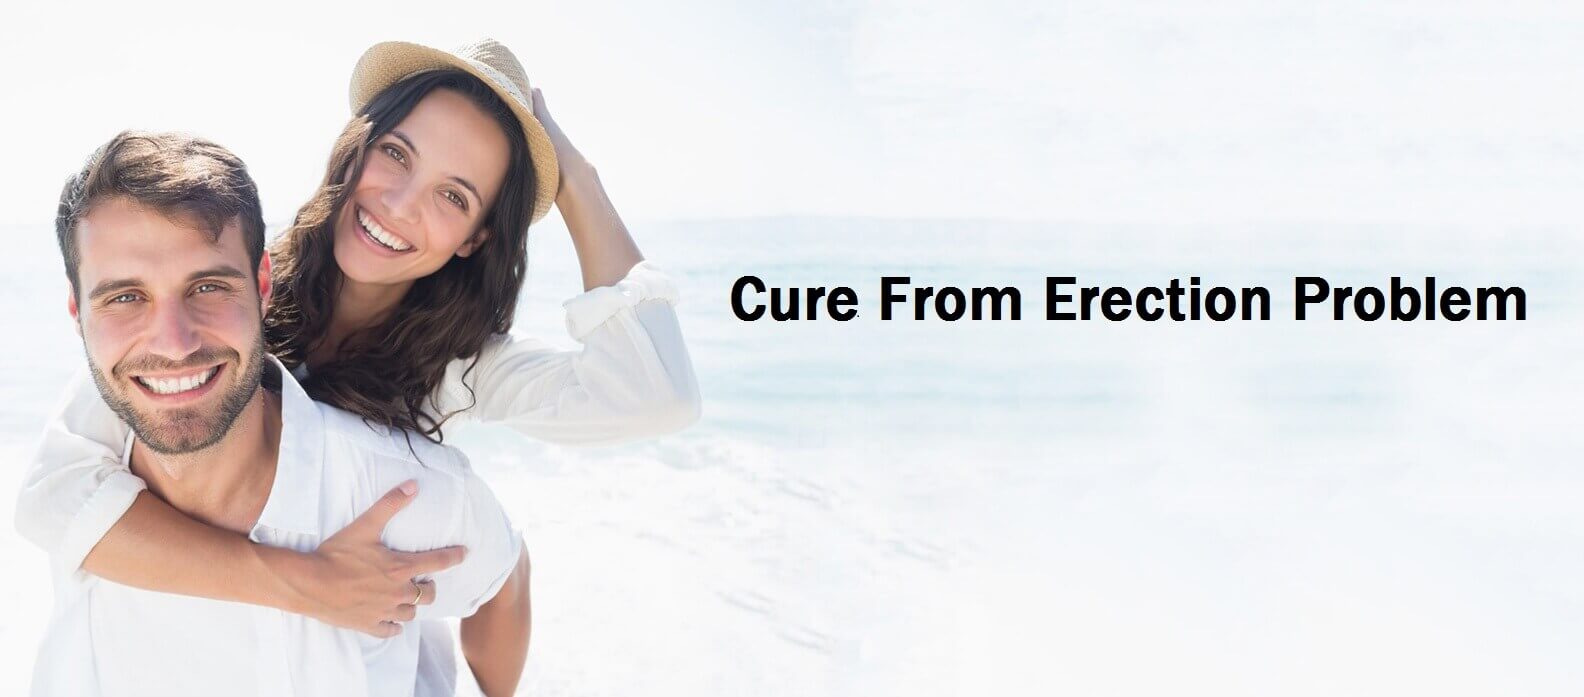 CURE FROM ERECTION PROBLEM